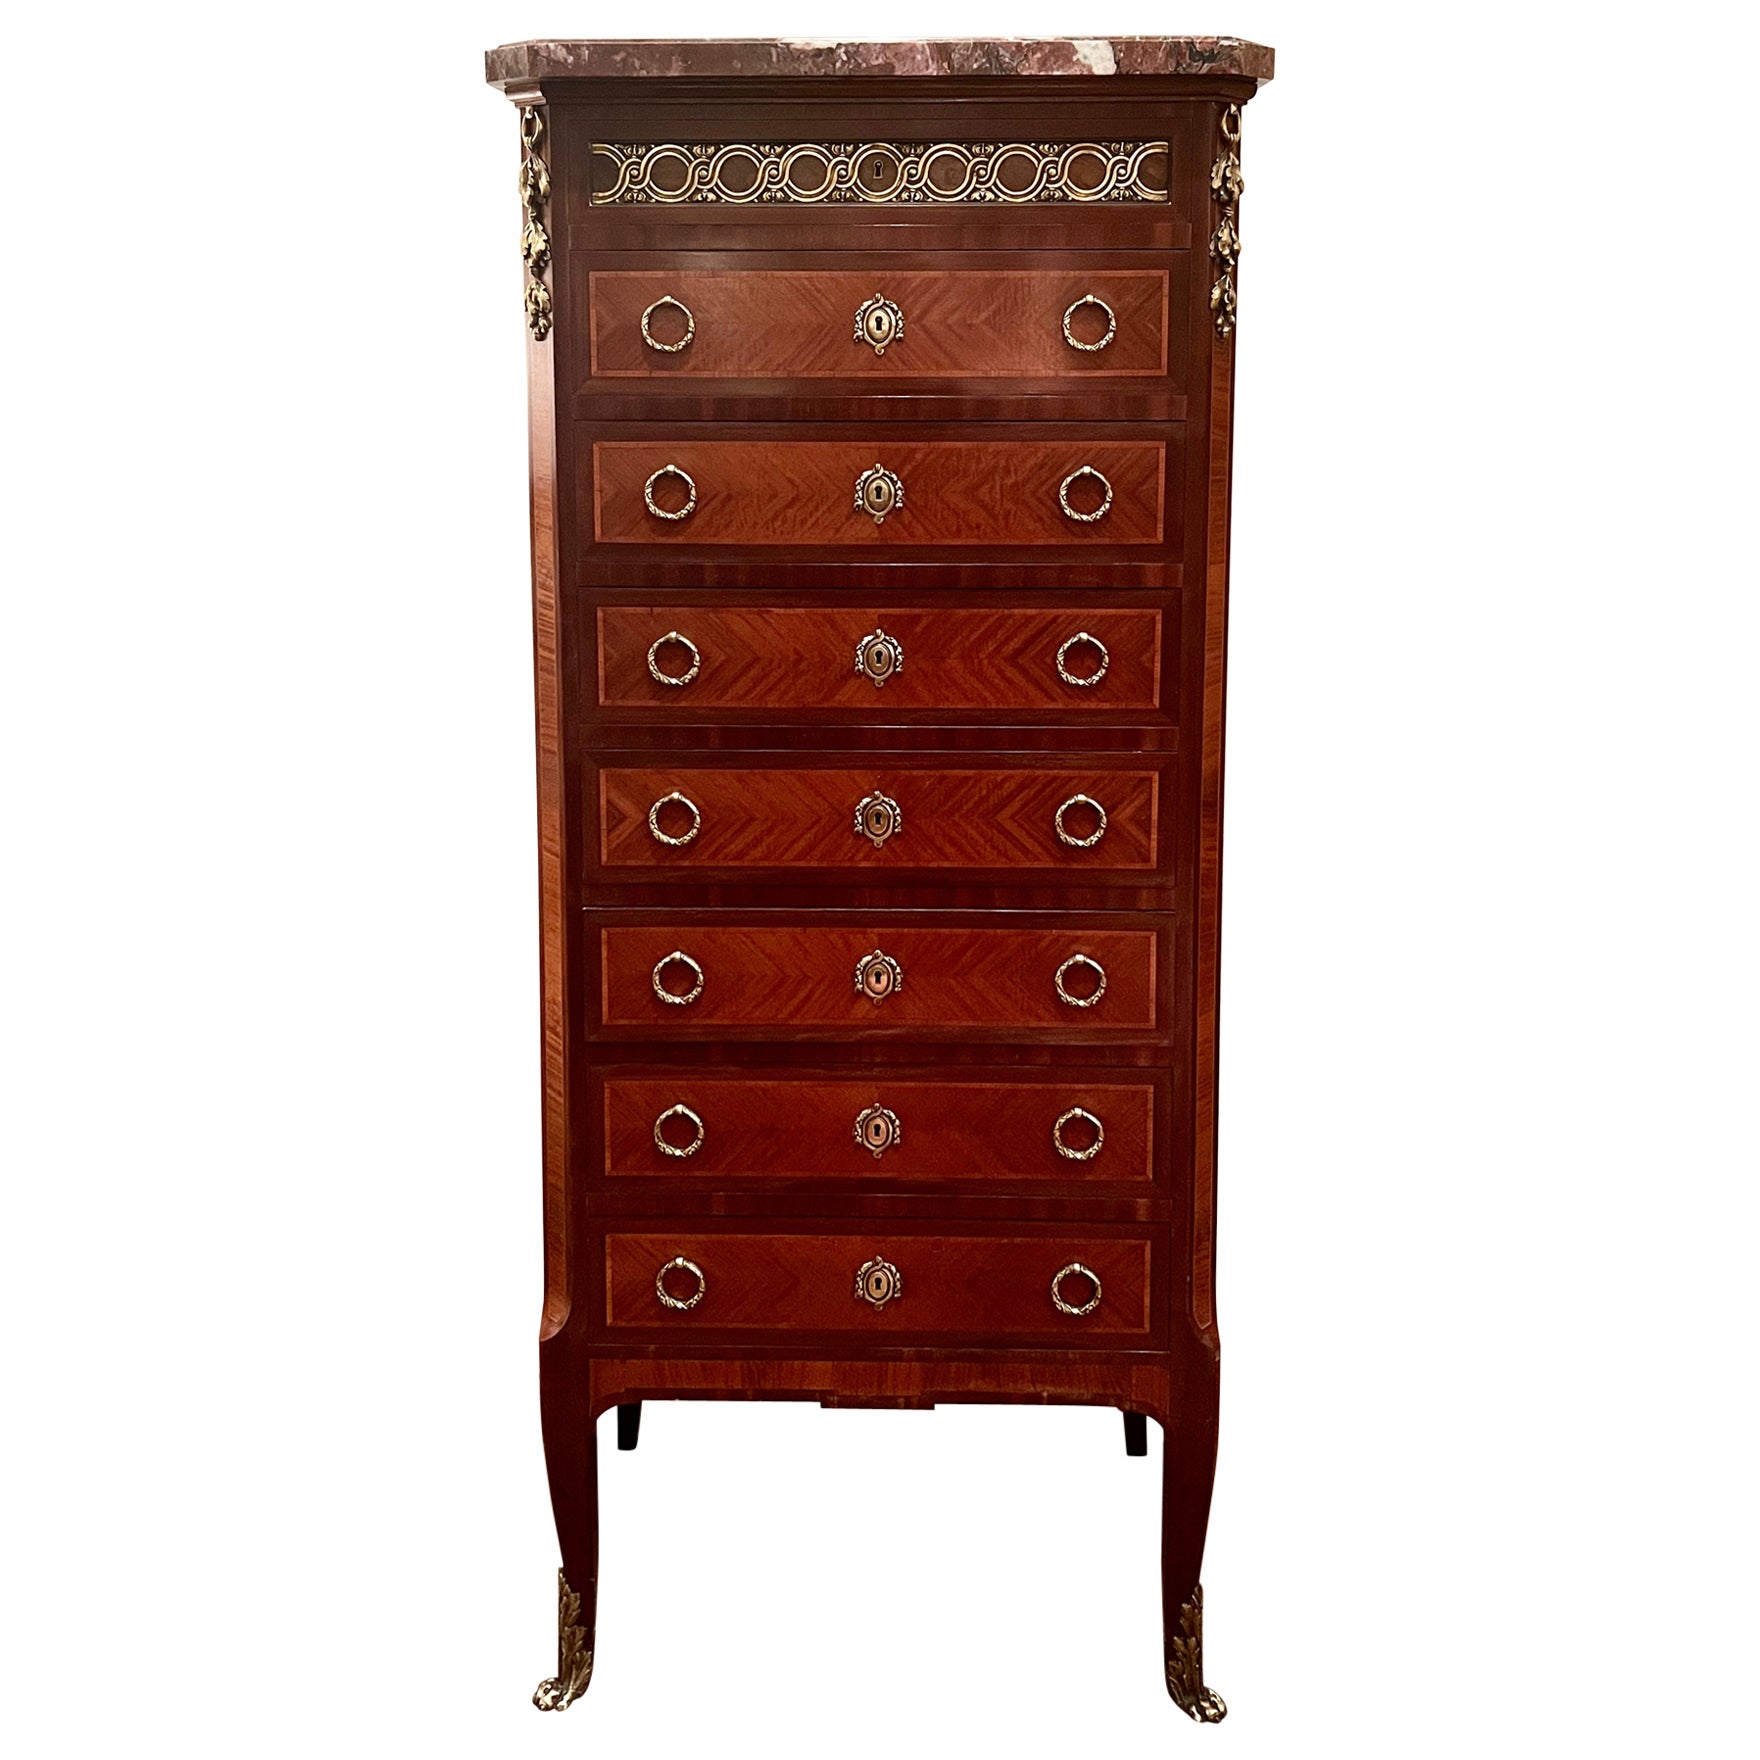 Antique French Marble-Top Mahogany & Gold Bronze Semainier Chest, Circa 1890. For Sale